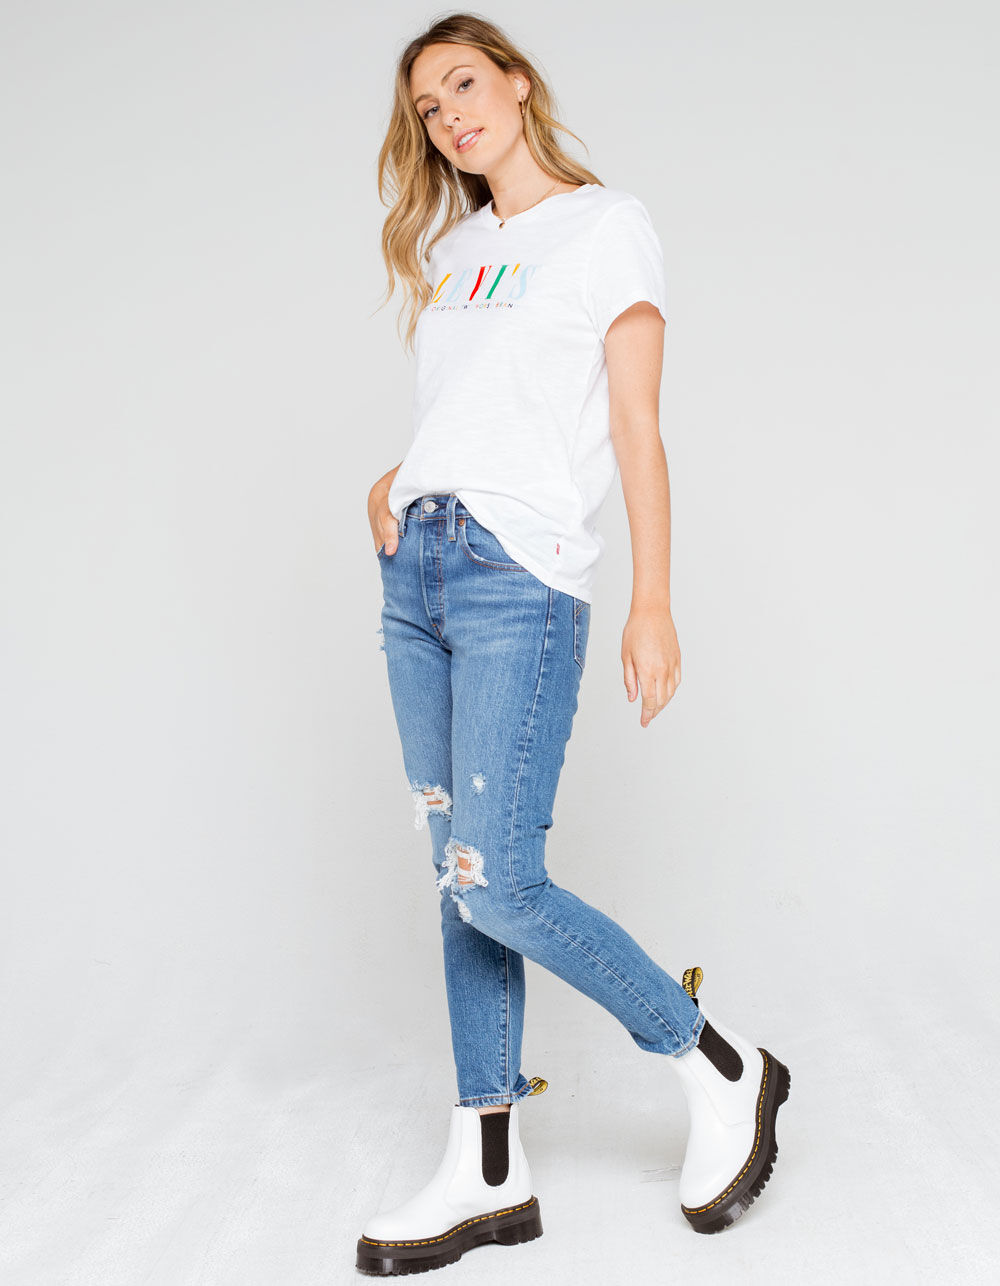 LEVI'S Original Two Horse Brand Perfect Womens Tee - WHITE | Tillys